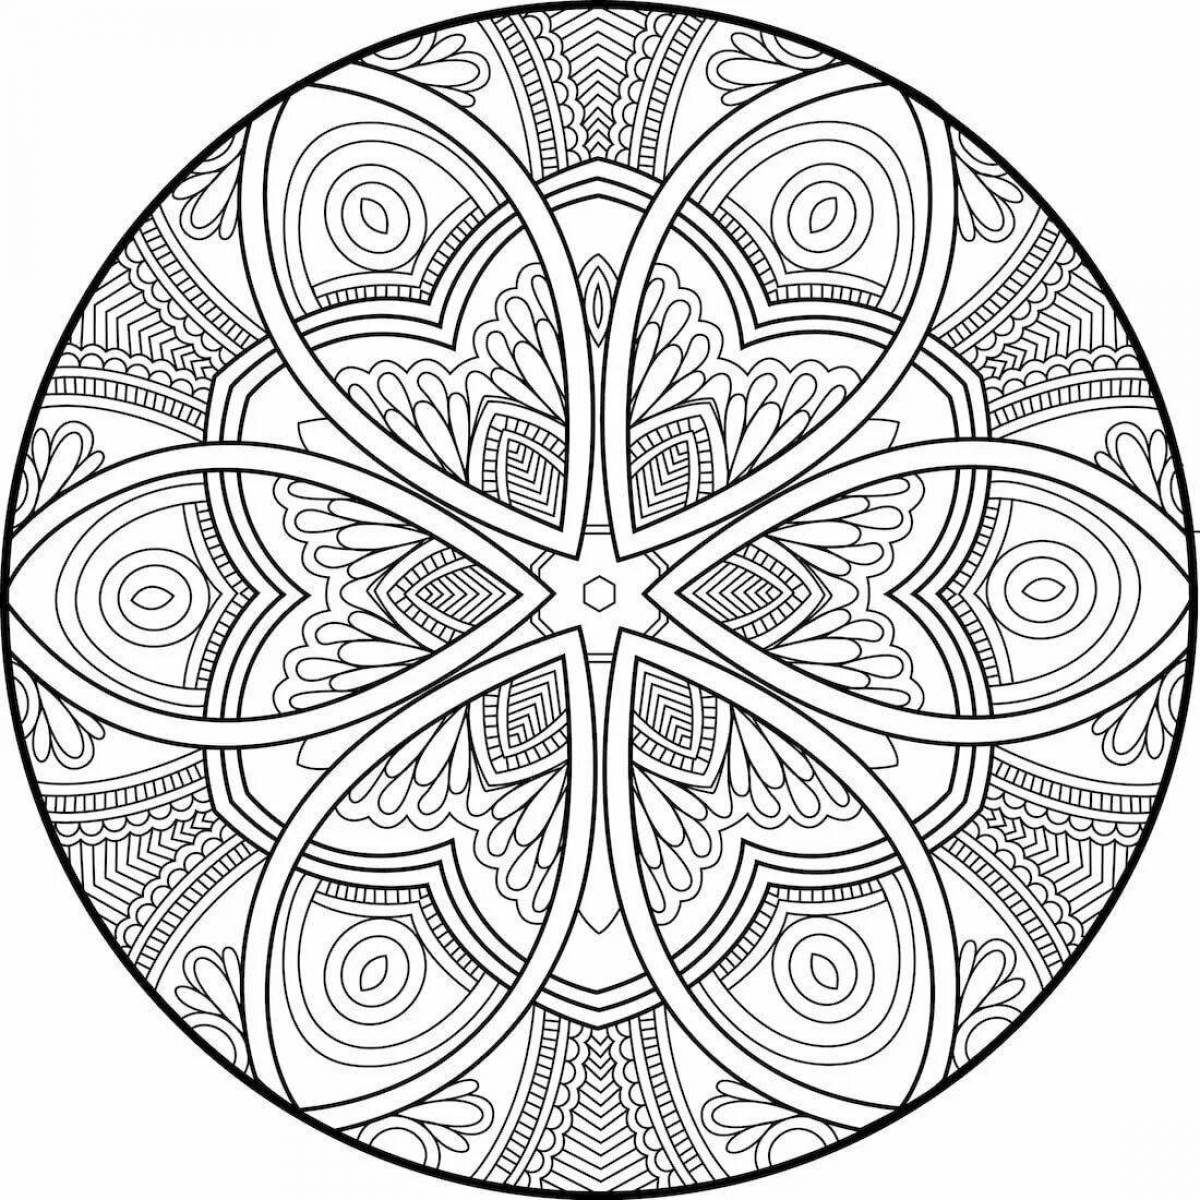 Great health and wellness mandala coloring page